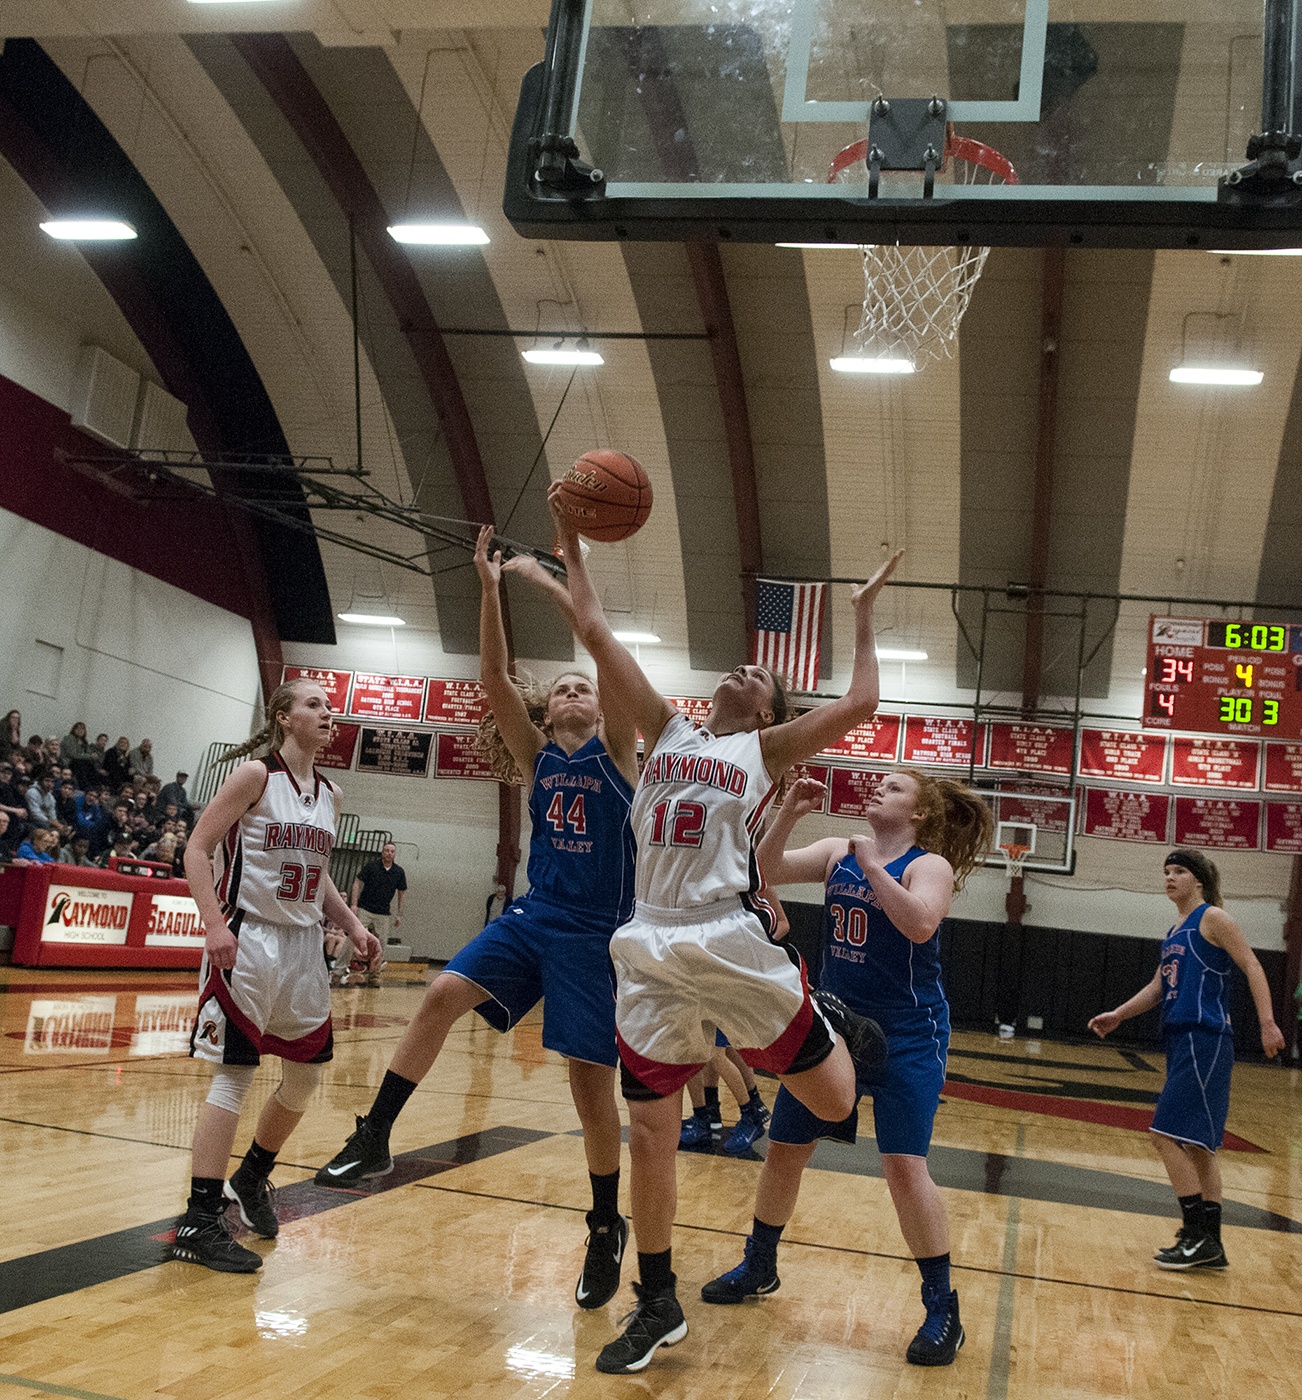 Raymond girls’ experience pays off in 42-39 win over rival Willapa Valley